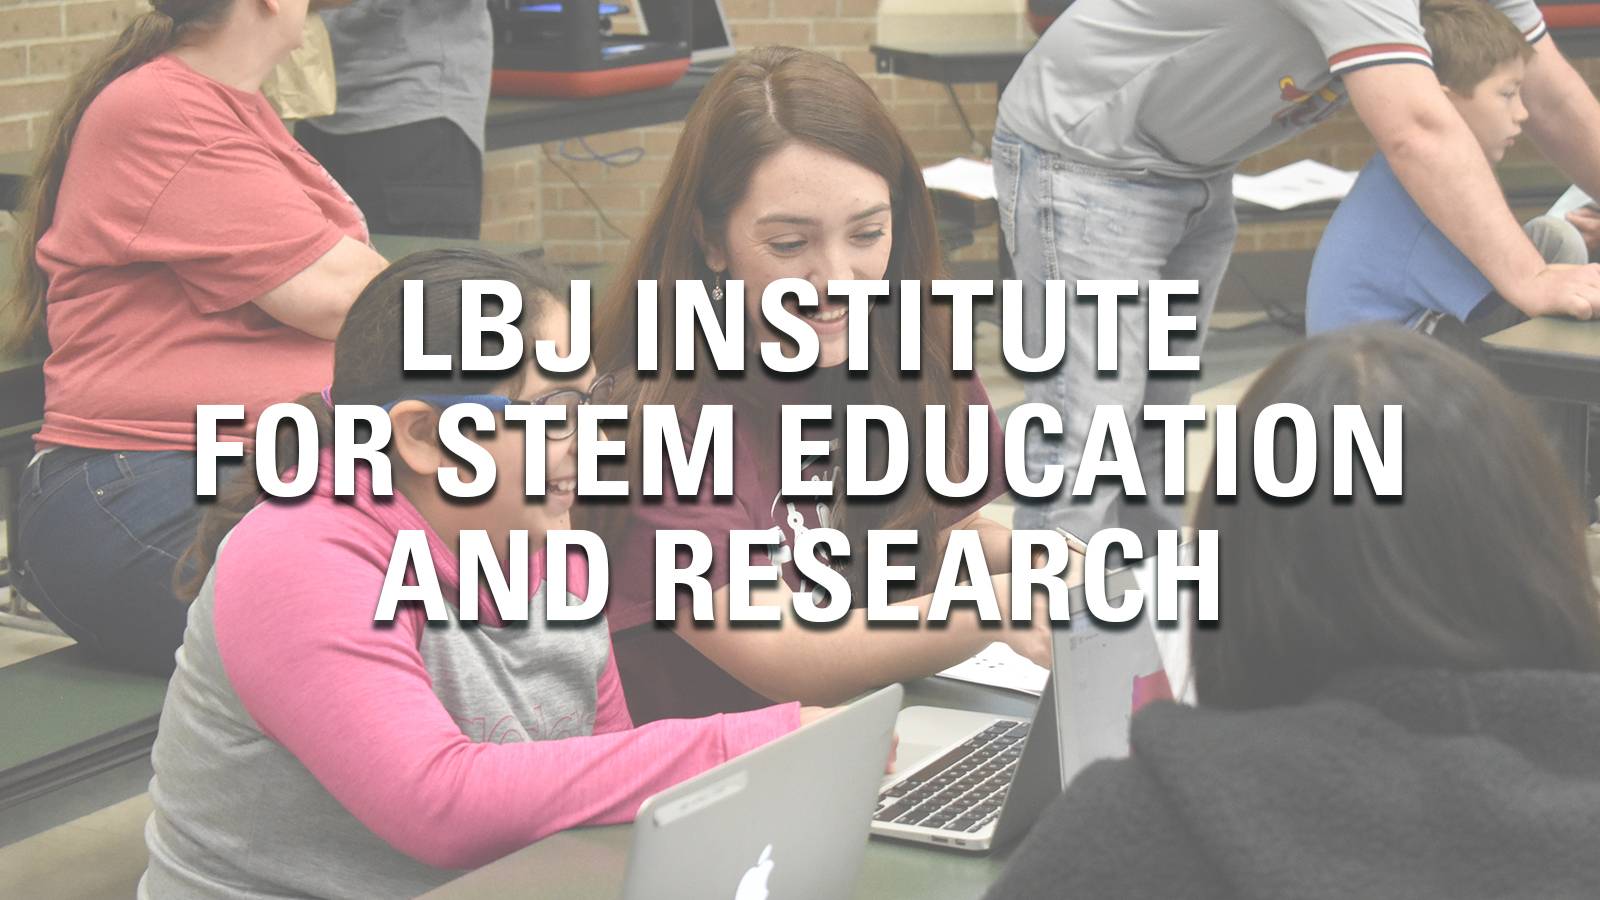 LBJ Institute for STEM Education and Research Faculty/Staff Directory